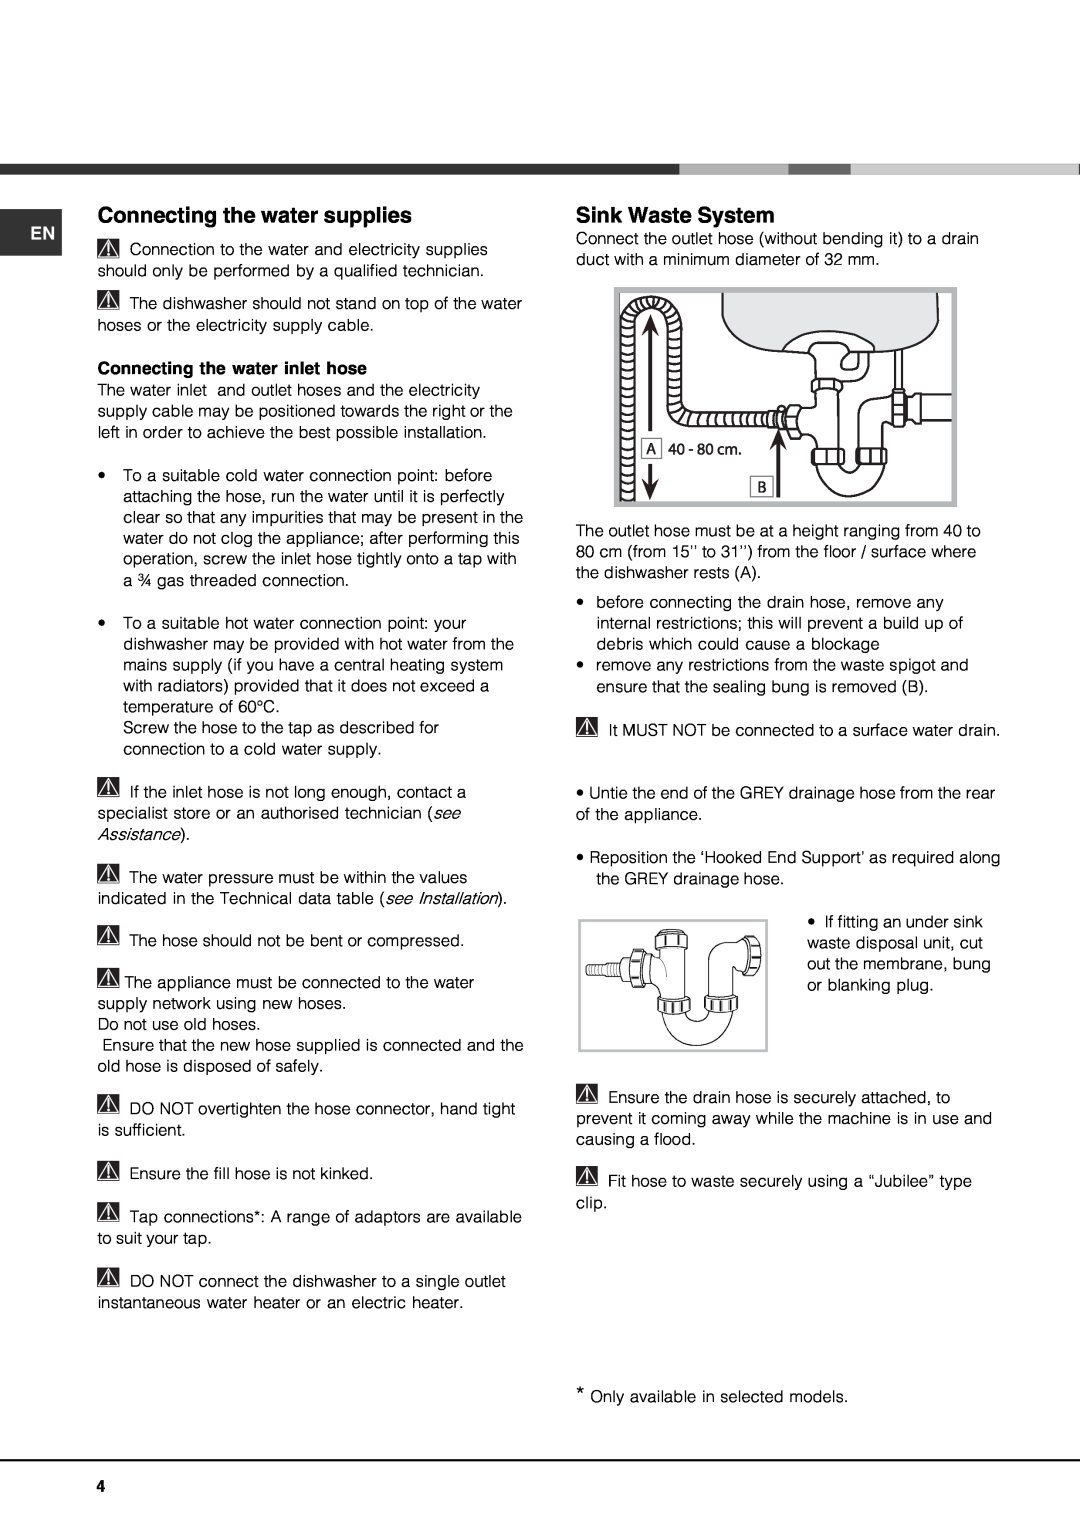 Hotpoint lft 3214 manual Connecting the water supplies, Sink Waste System, Connecting the water inlet hose 